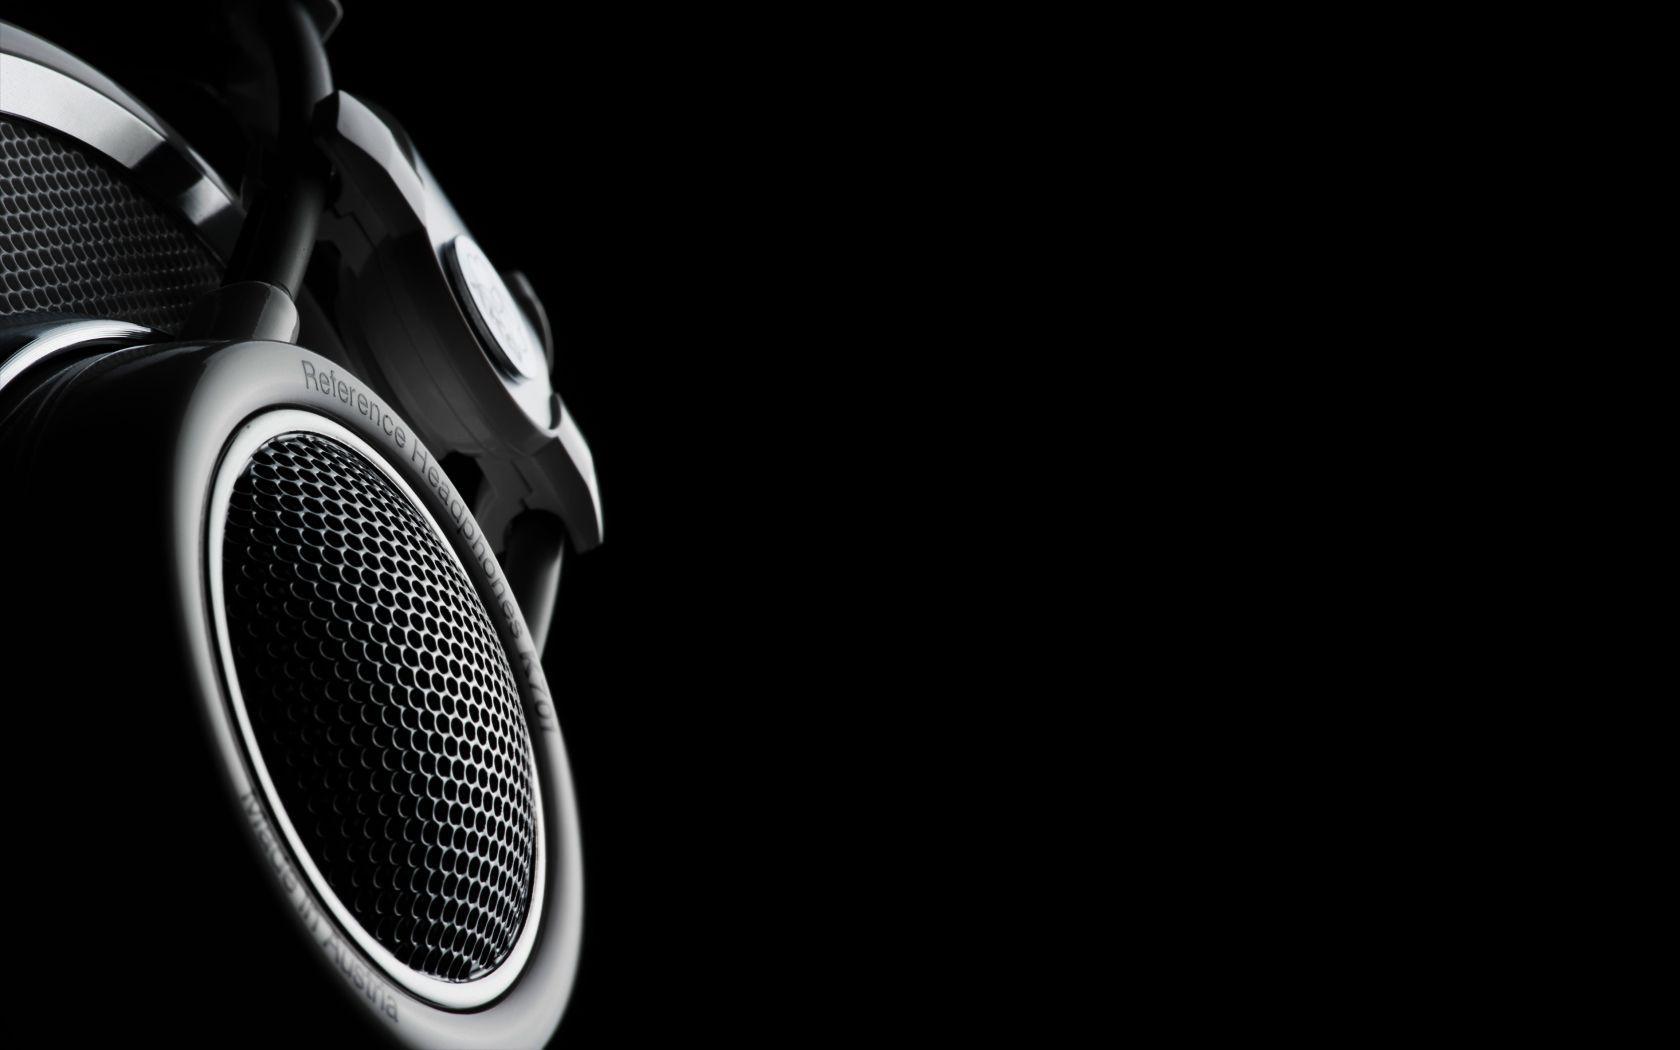 Professional Headset Speakers. Black and White Wallpaper